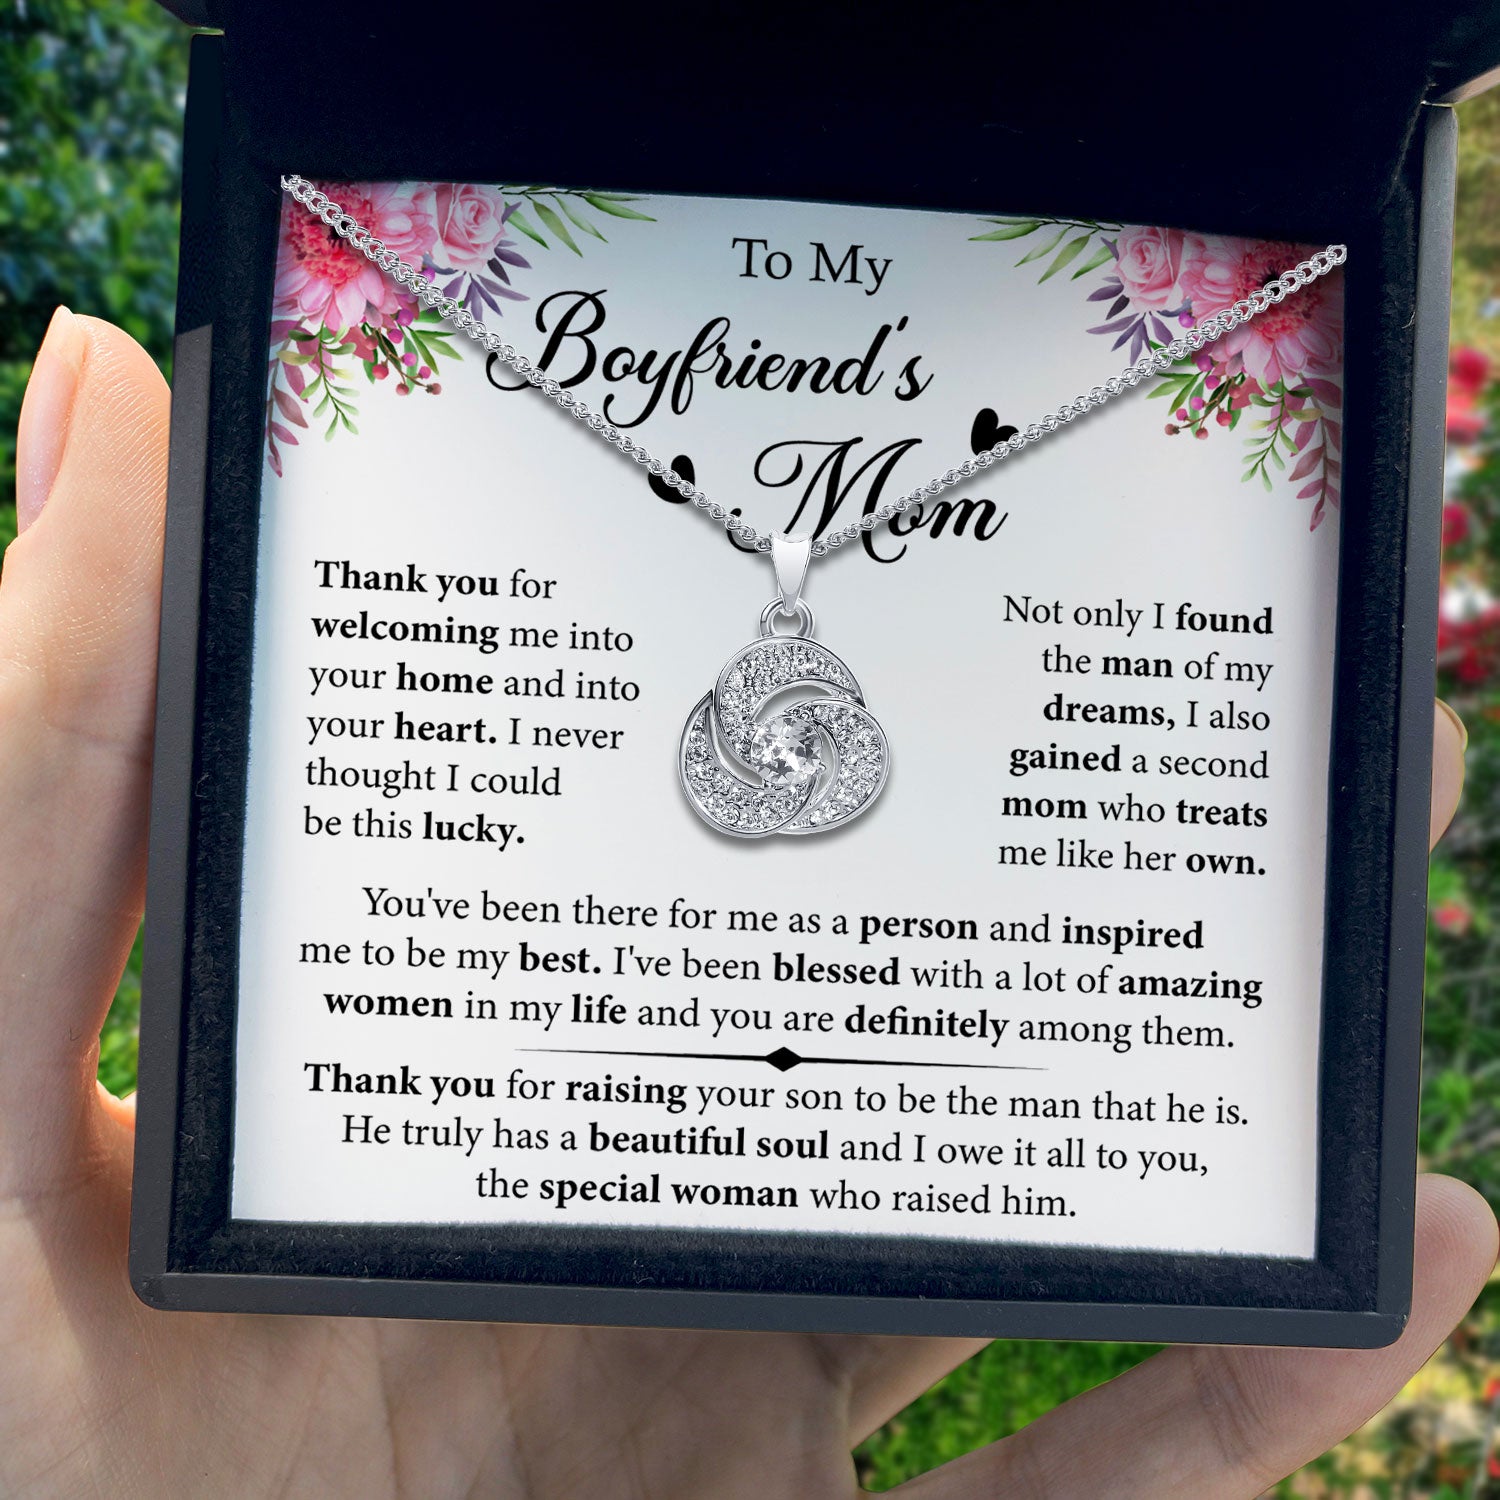 To My Boyfriend's Mom - I Also Gained a Second Mom - Tryndi Love Knot Necklace